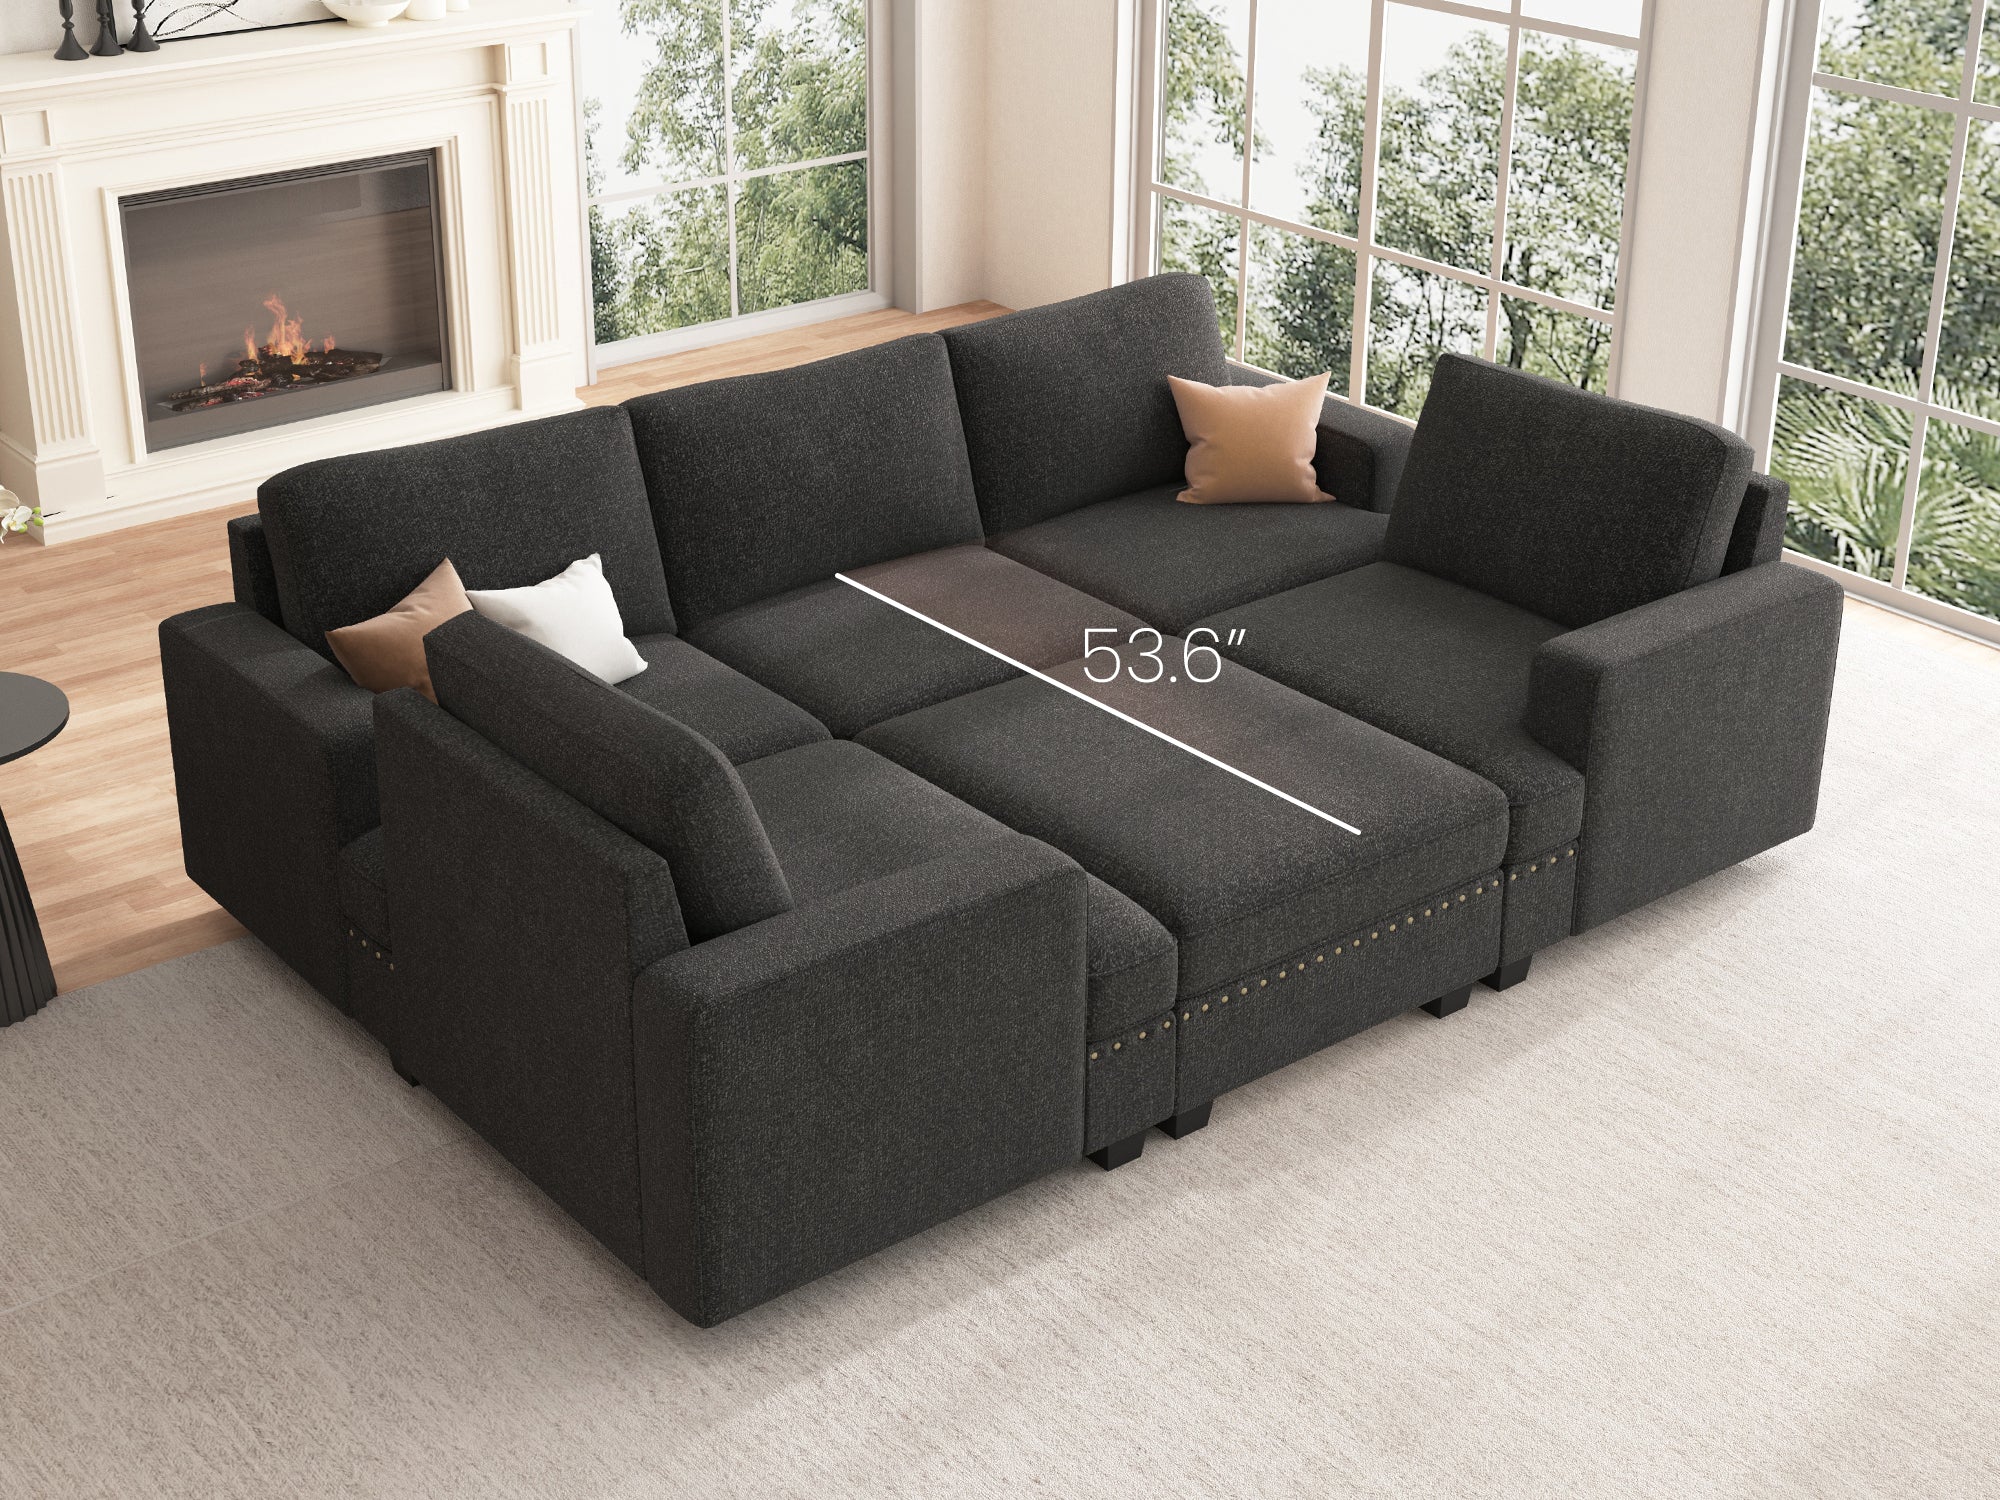 NOLANY 6-Piece Polyester Modular Sleeper Sectional With Storage Space